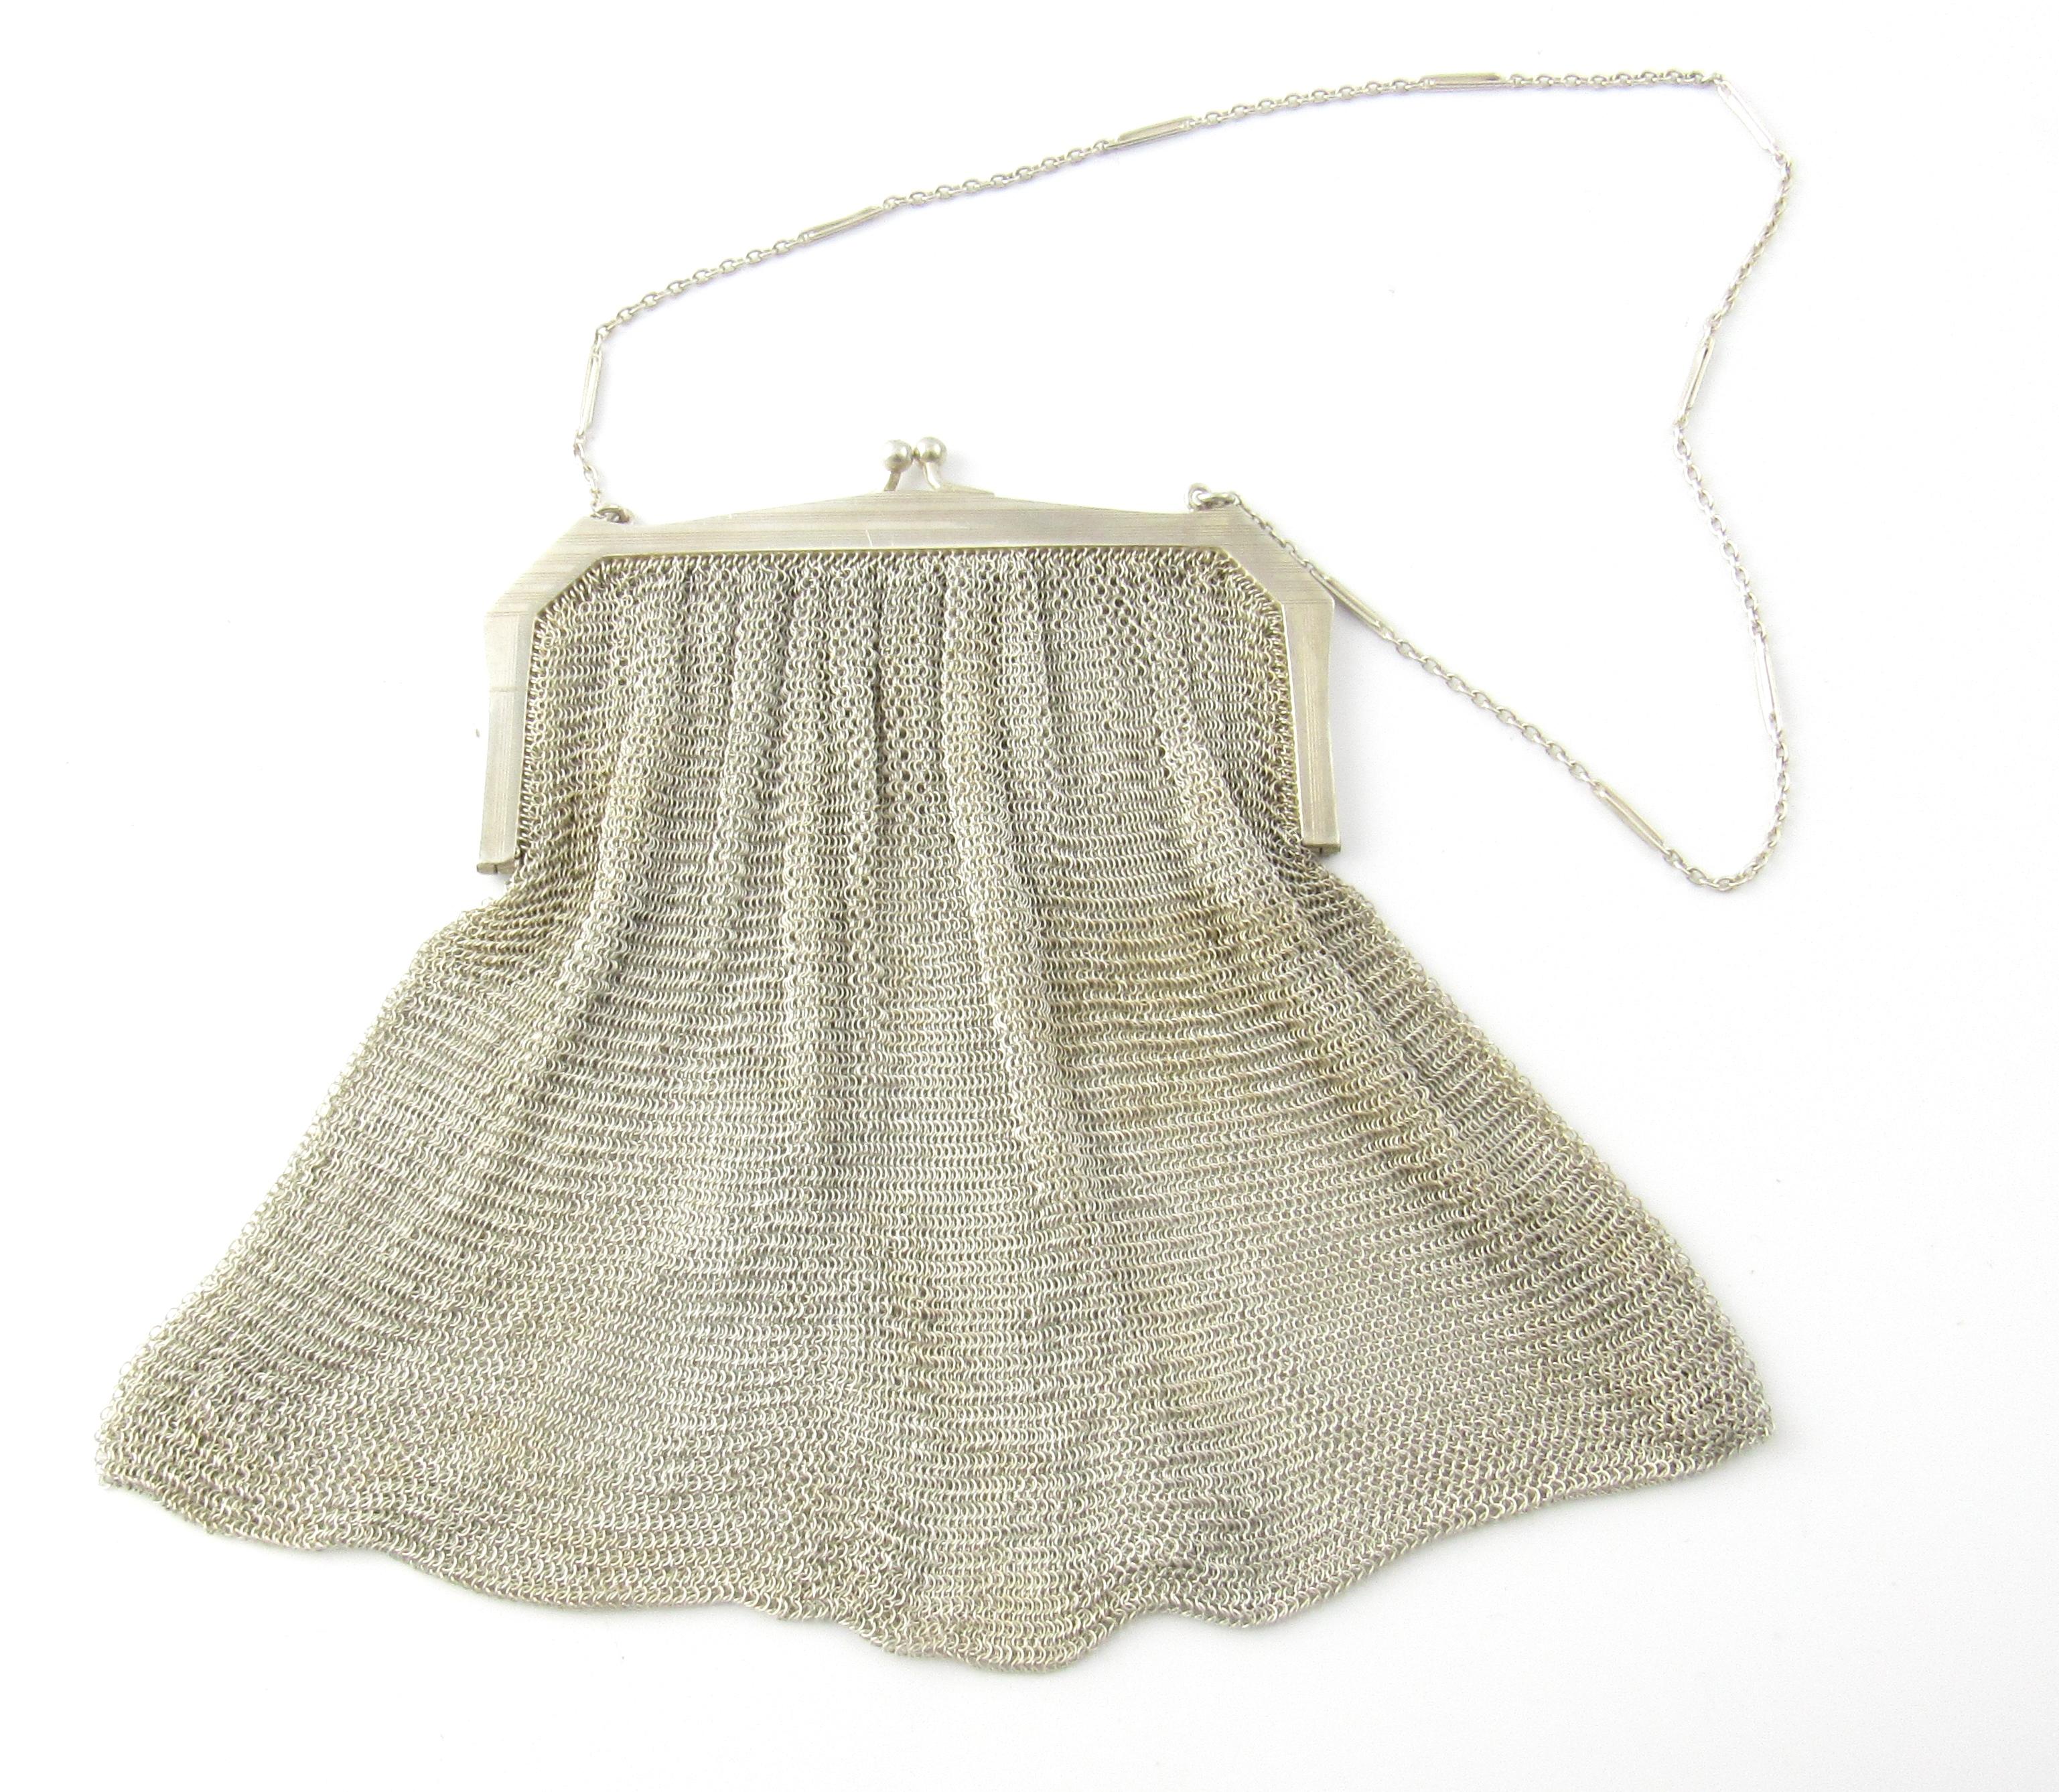 Victorian Sterling Silver Mesh Purse

This is a lovely sterling silver mesh purse with chain handle. You will simply be delighted with the condition, style, and uniqueness of this beautiful purse!

Measurement: Purse measures 5 and 1/2 inches in